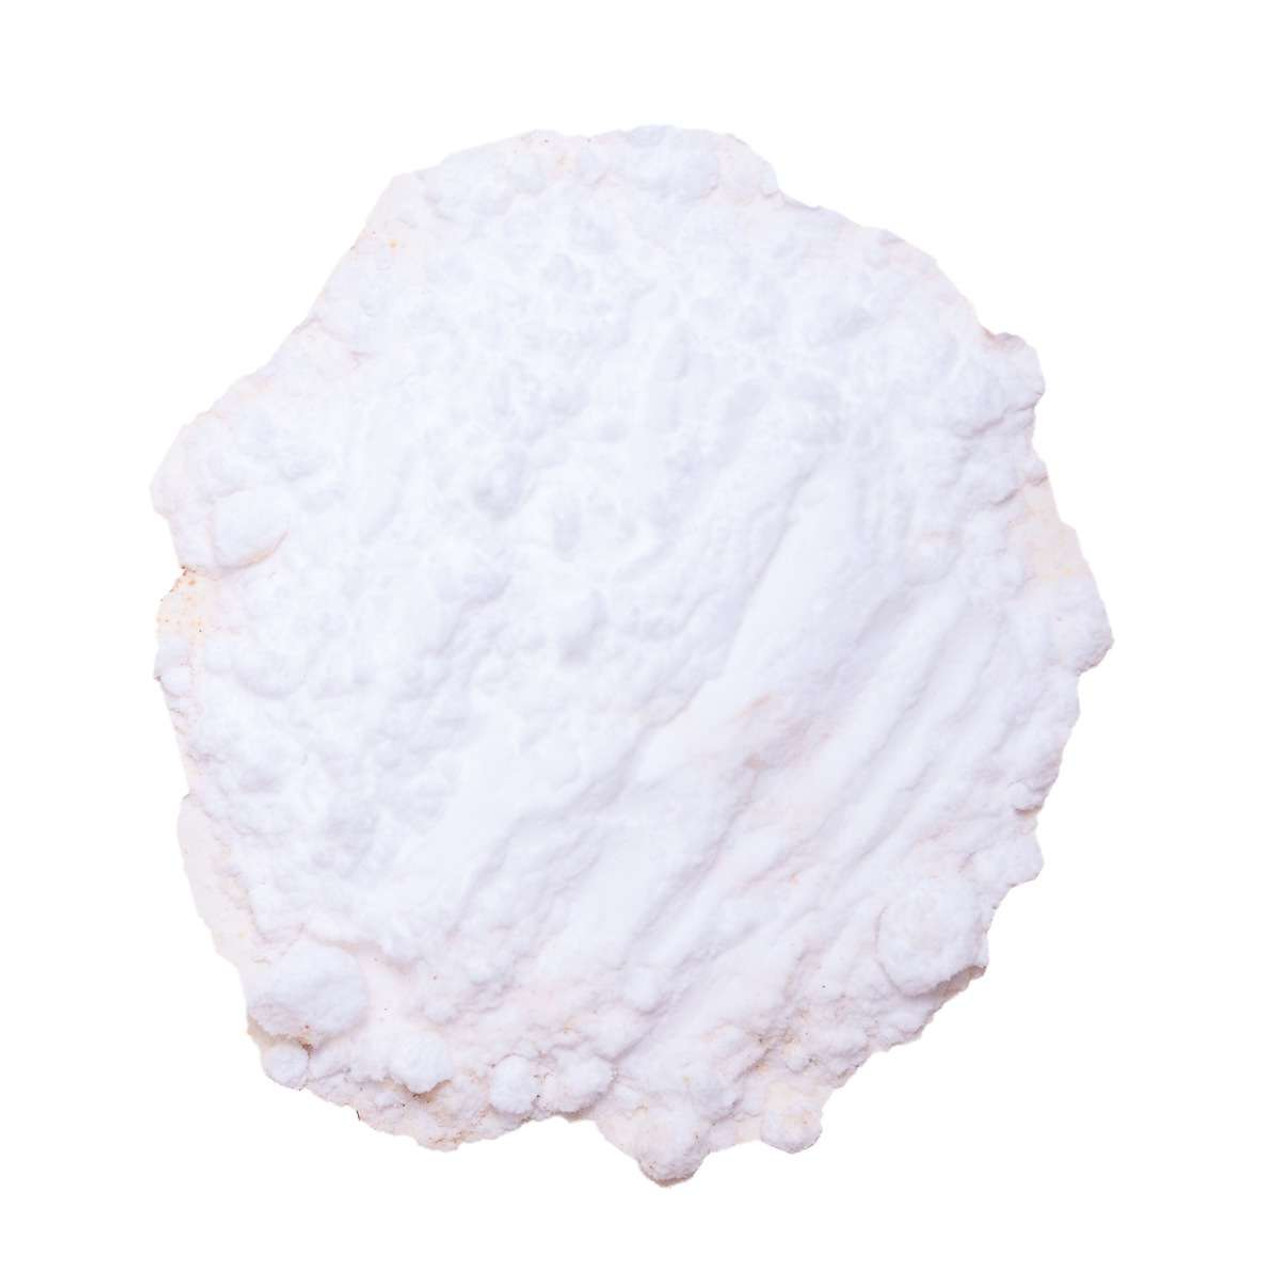 Pure Original Ingredients Cream of Tartar (1 lb) Pure & Natural, Baking &  Cleaning, DIY Bath Bombs & More, Eco-Friendly Packaging